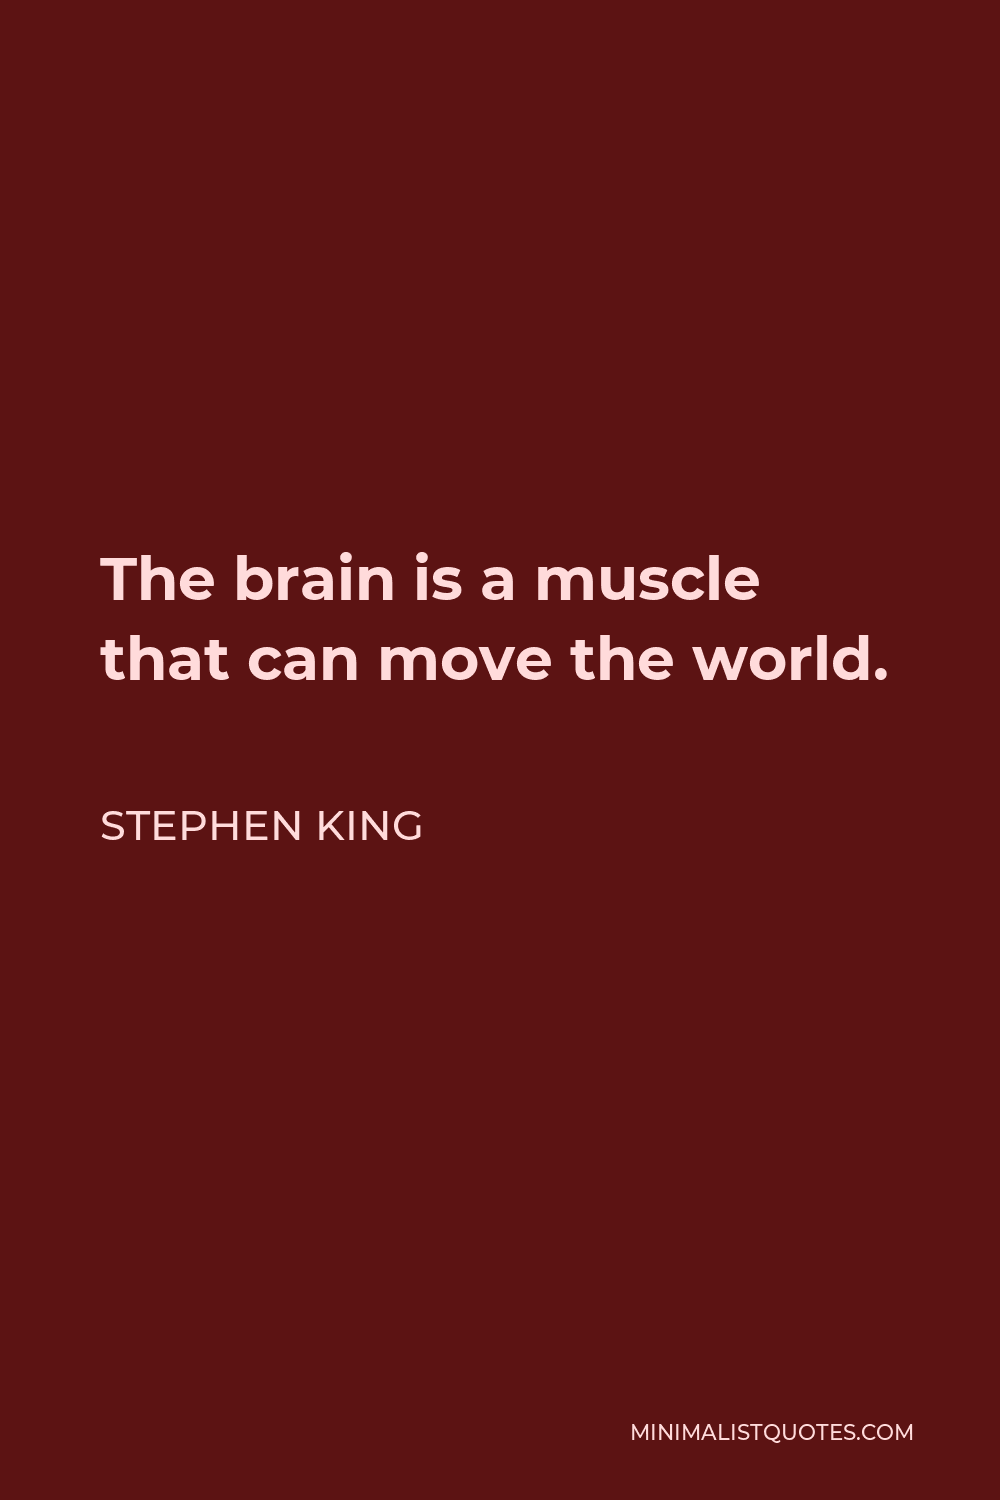 Stephen King Quote - The brain is a muscle that can move the world.